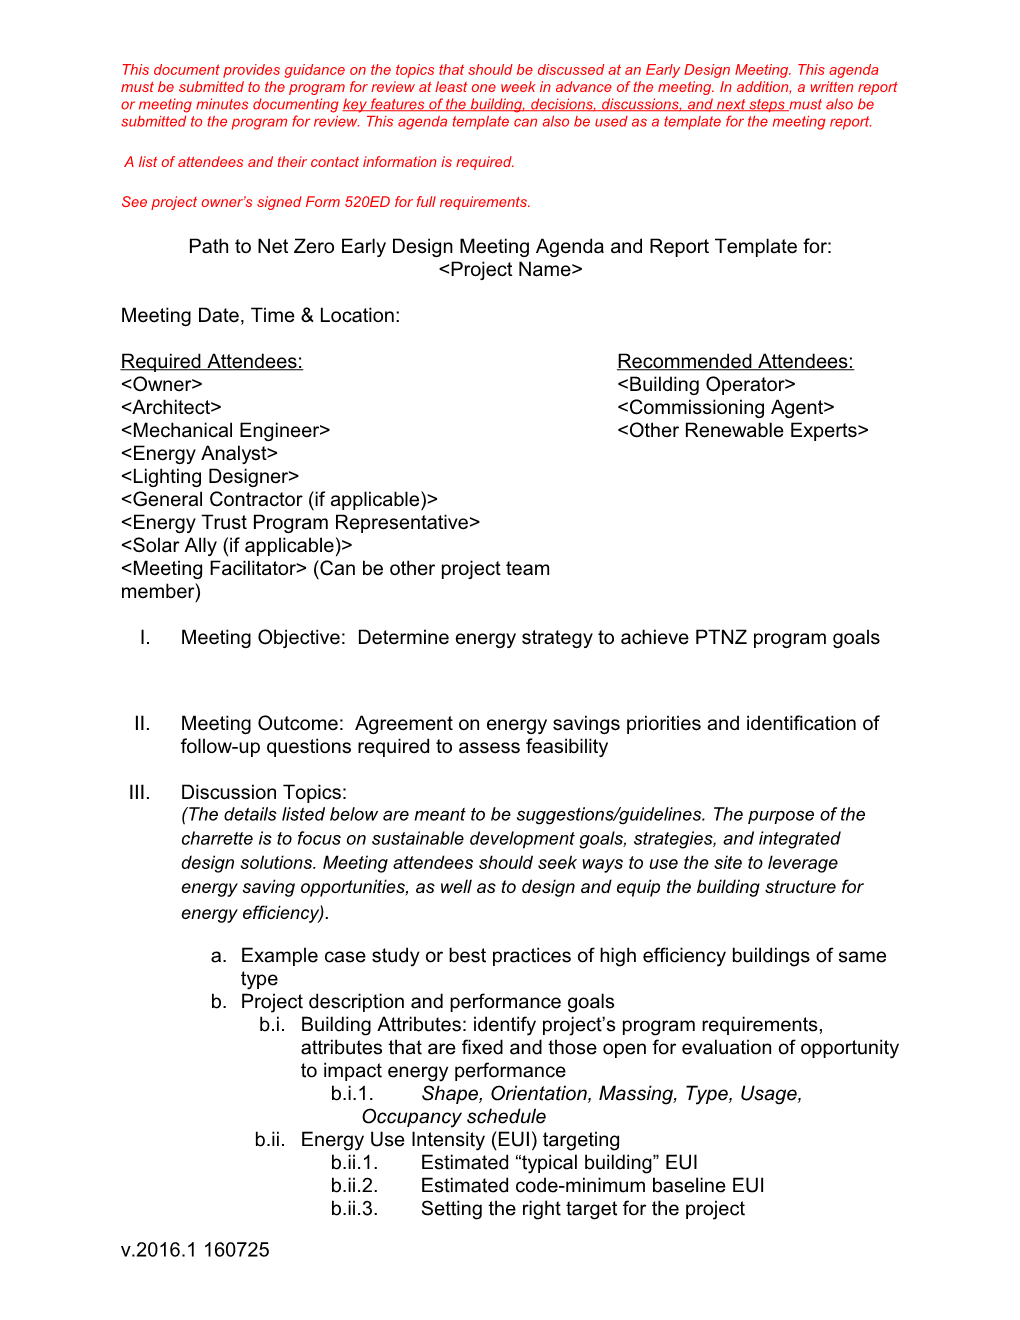 Path to Net Zero Early Design Meeting Agenda and Report Template For